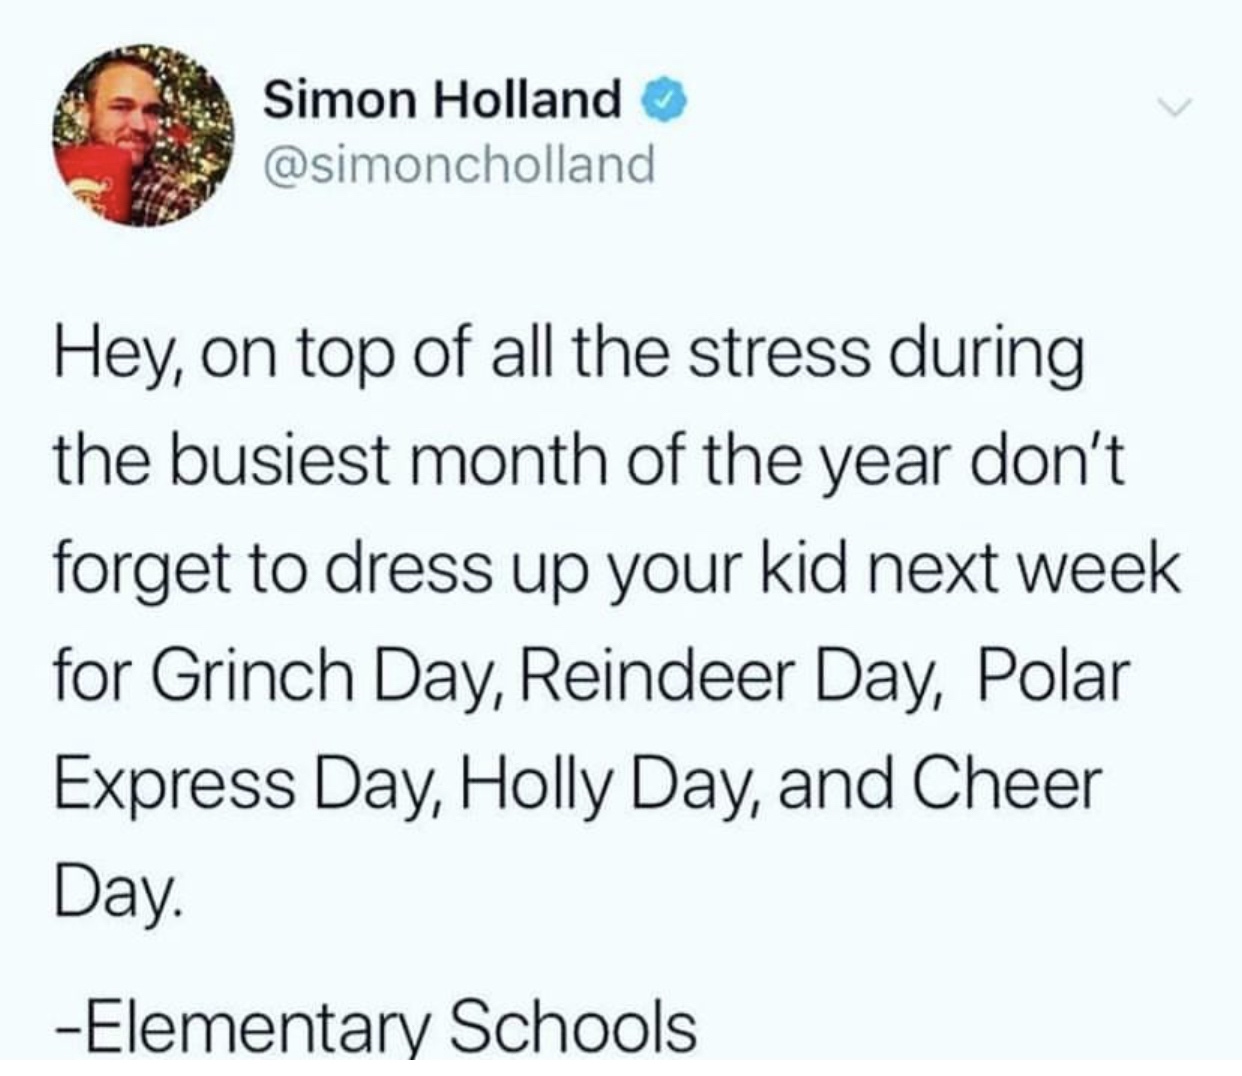 bee borrow the car - Simon Holland Hey, on top of all the stress during the busiest month of the year don't forget to dress up your kid next week for Grinch Day, Reindeer Day, Polar Express Day, Holly Day, and Cheer Day. Elementary Schools